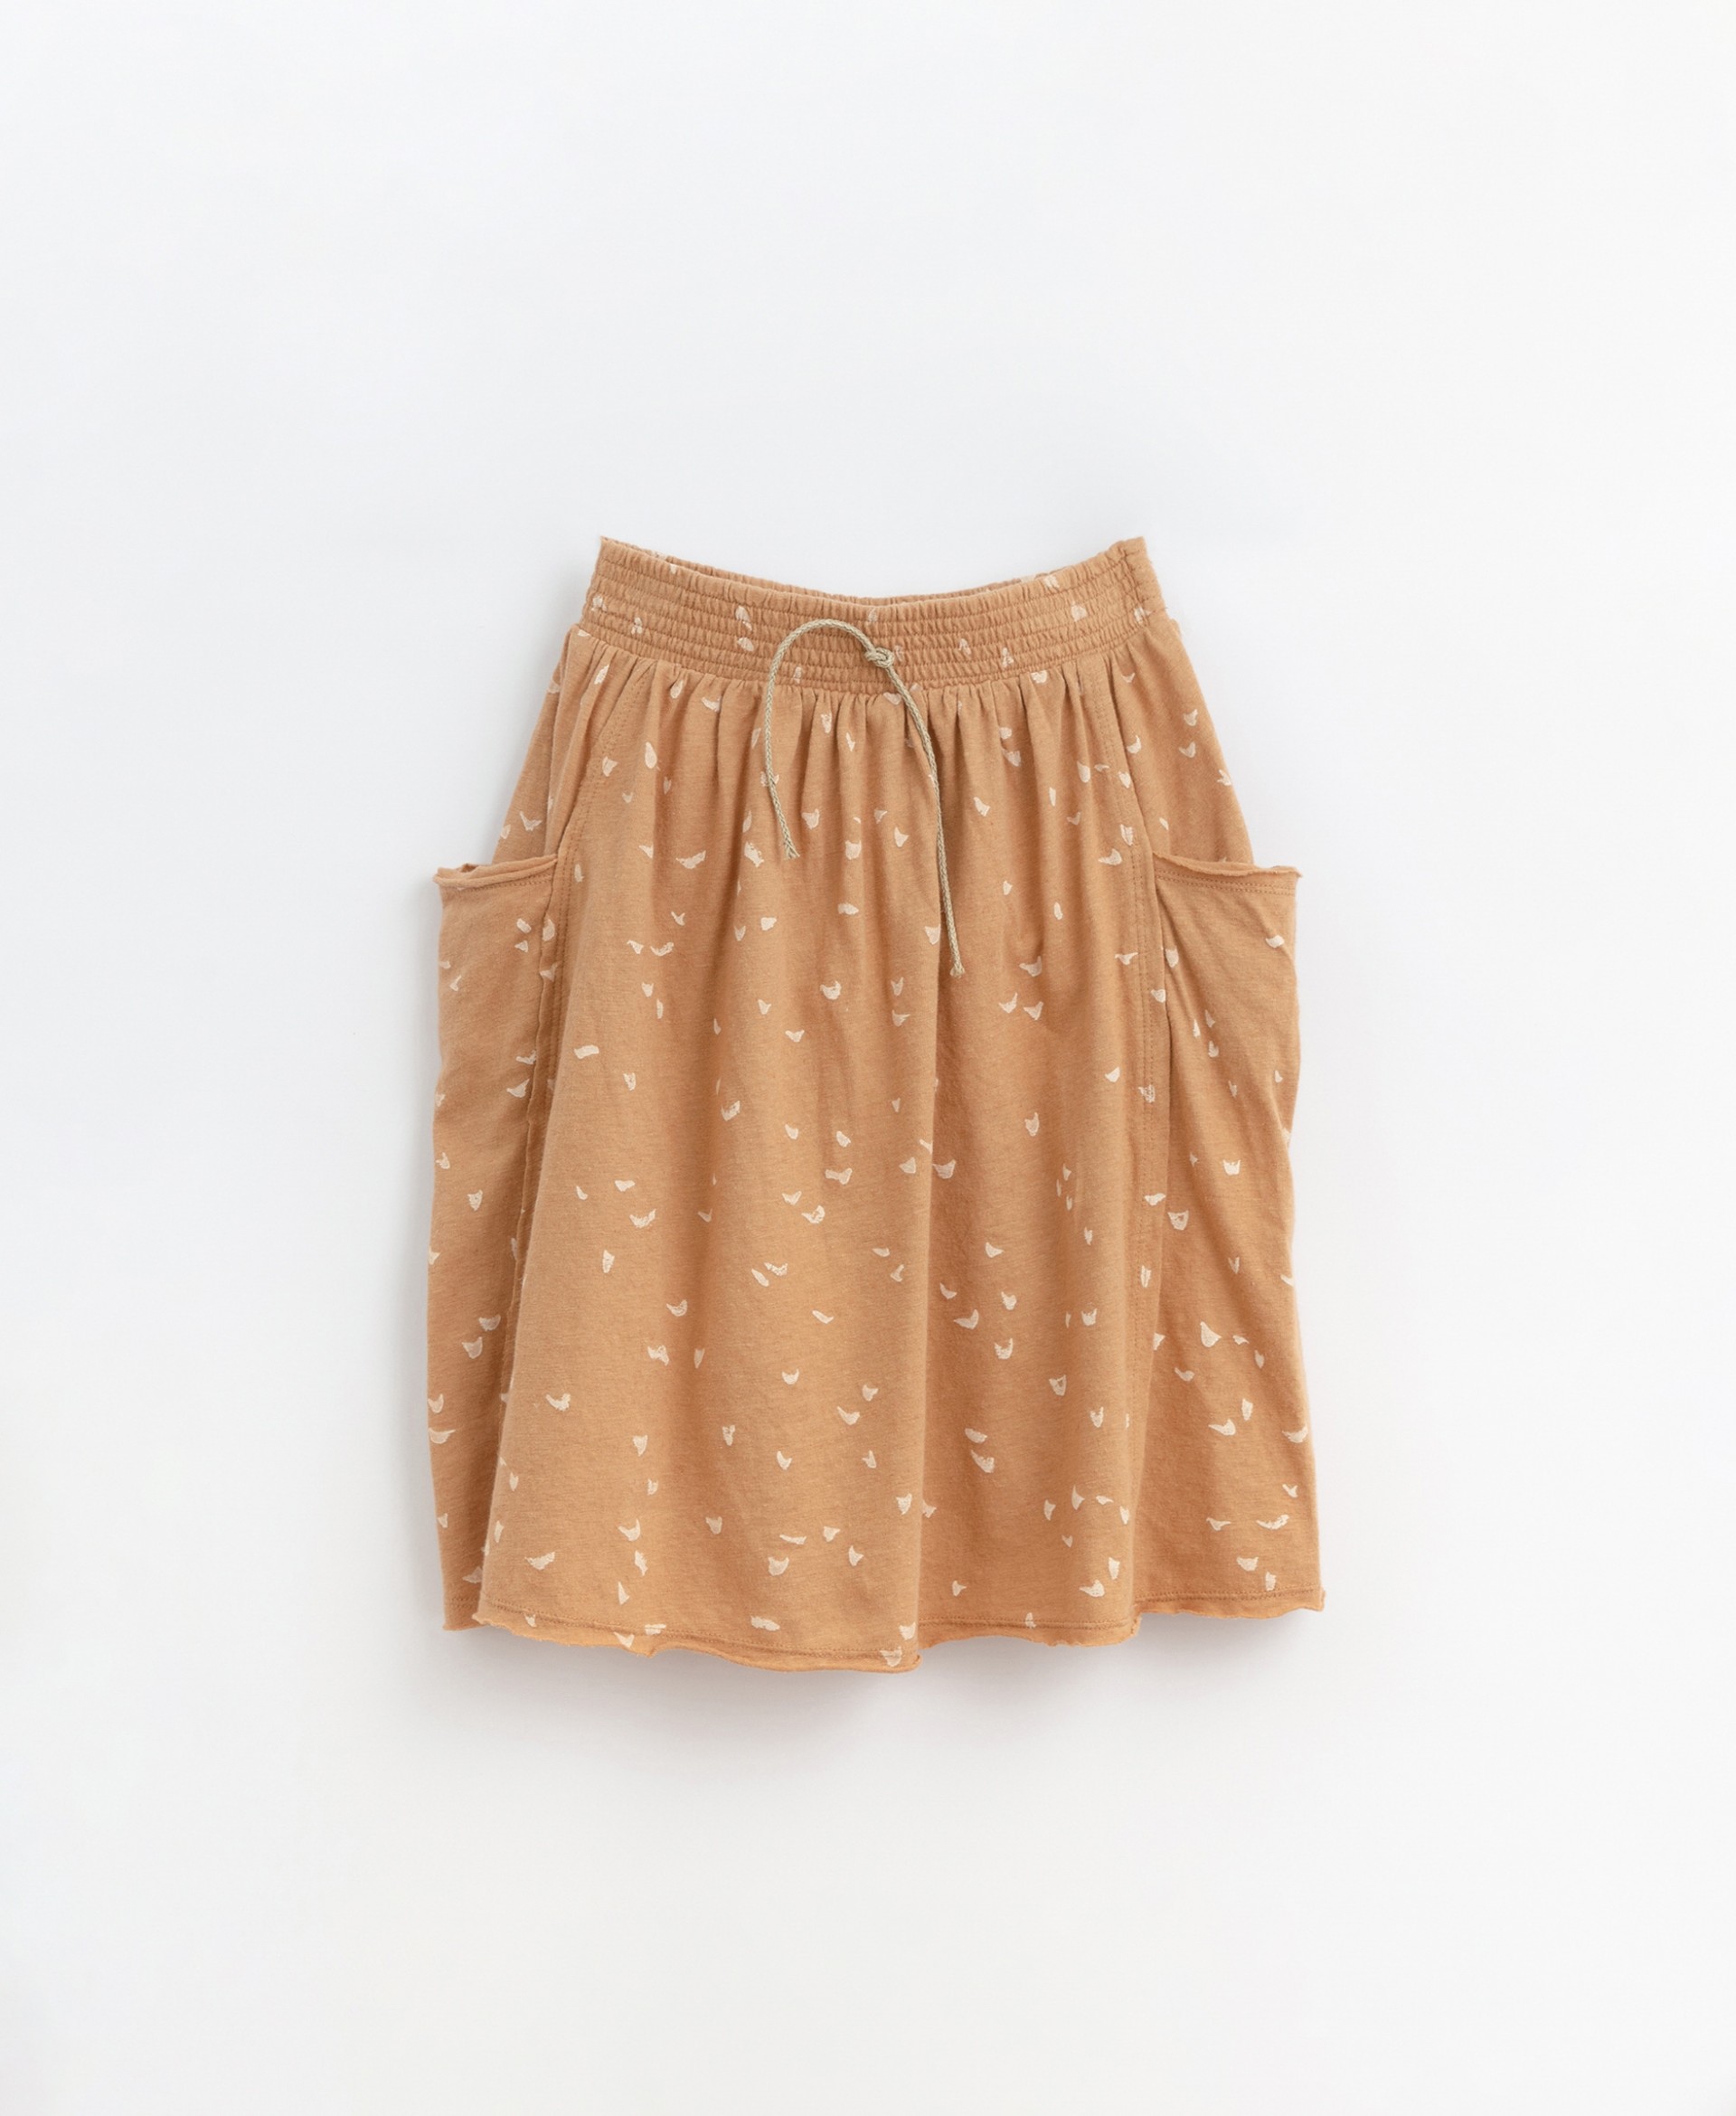 Skirt with side pockets | Basketry